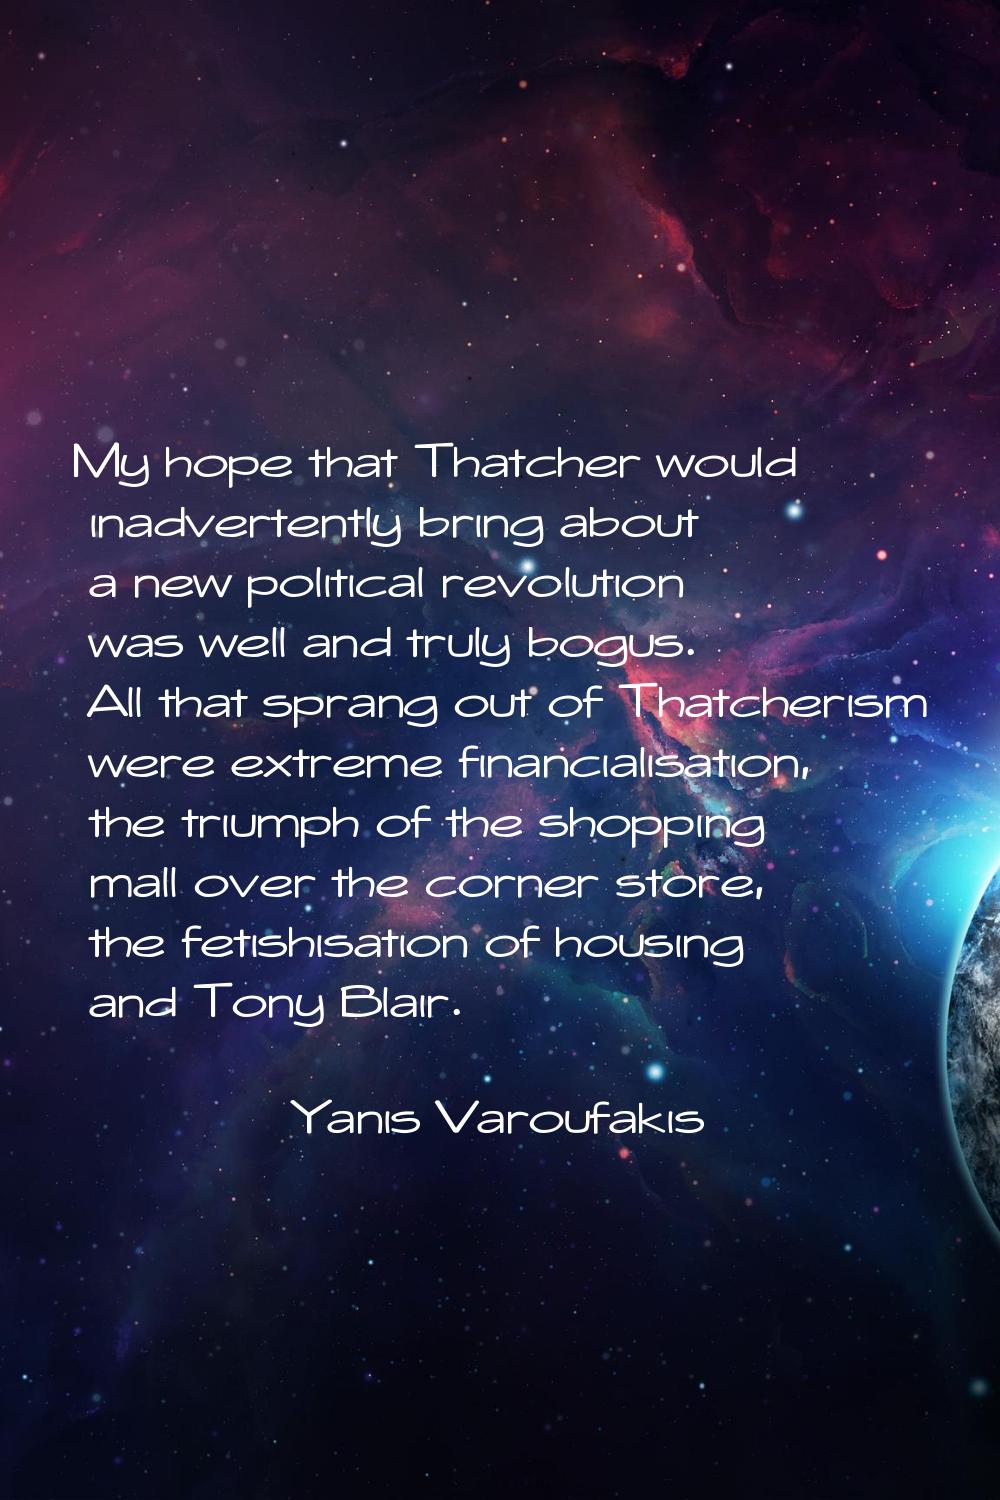 My hope that Thatcher would inadvertently bring about a new political revolution was well and truly